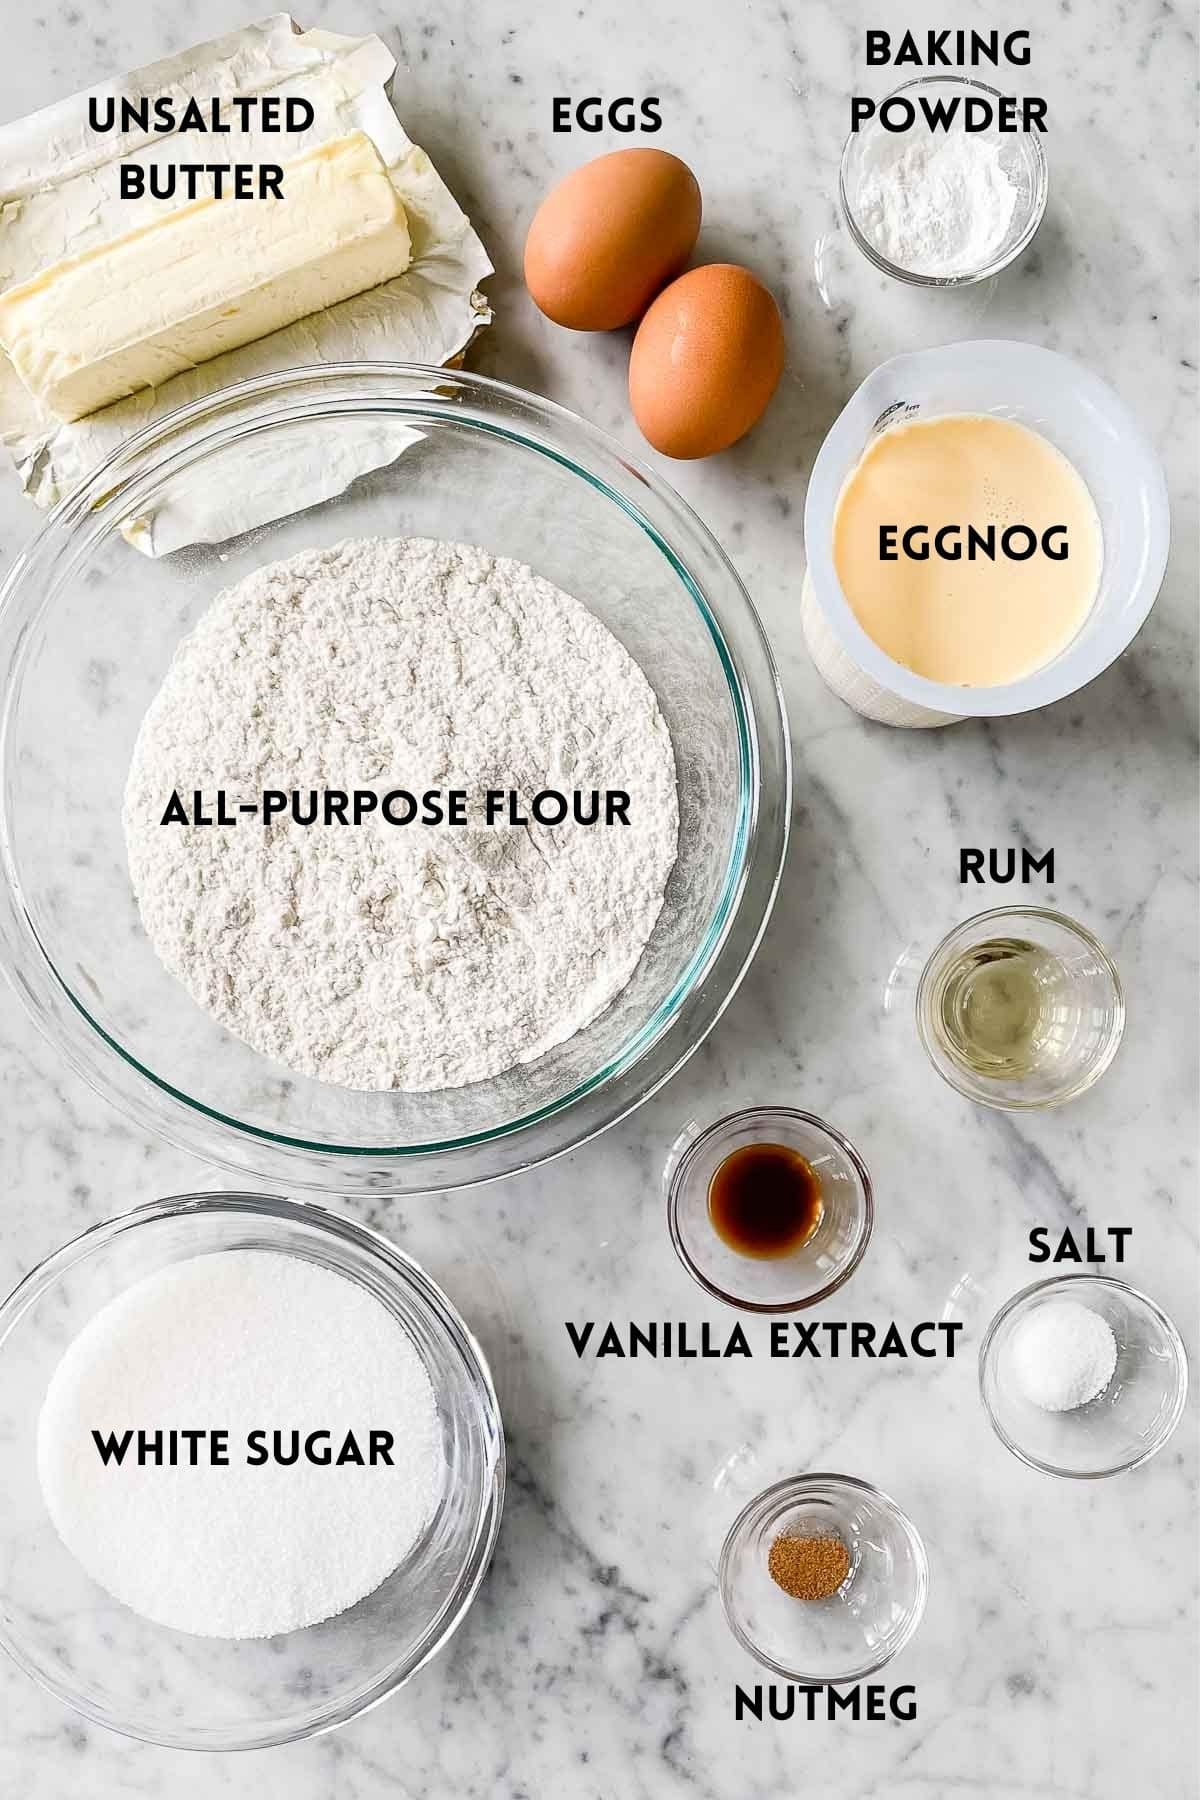 Ingredients needed for this recipe